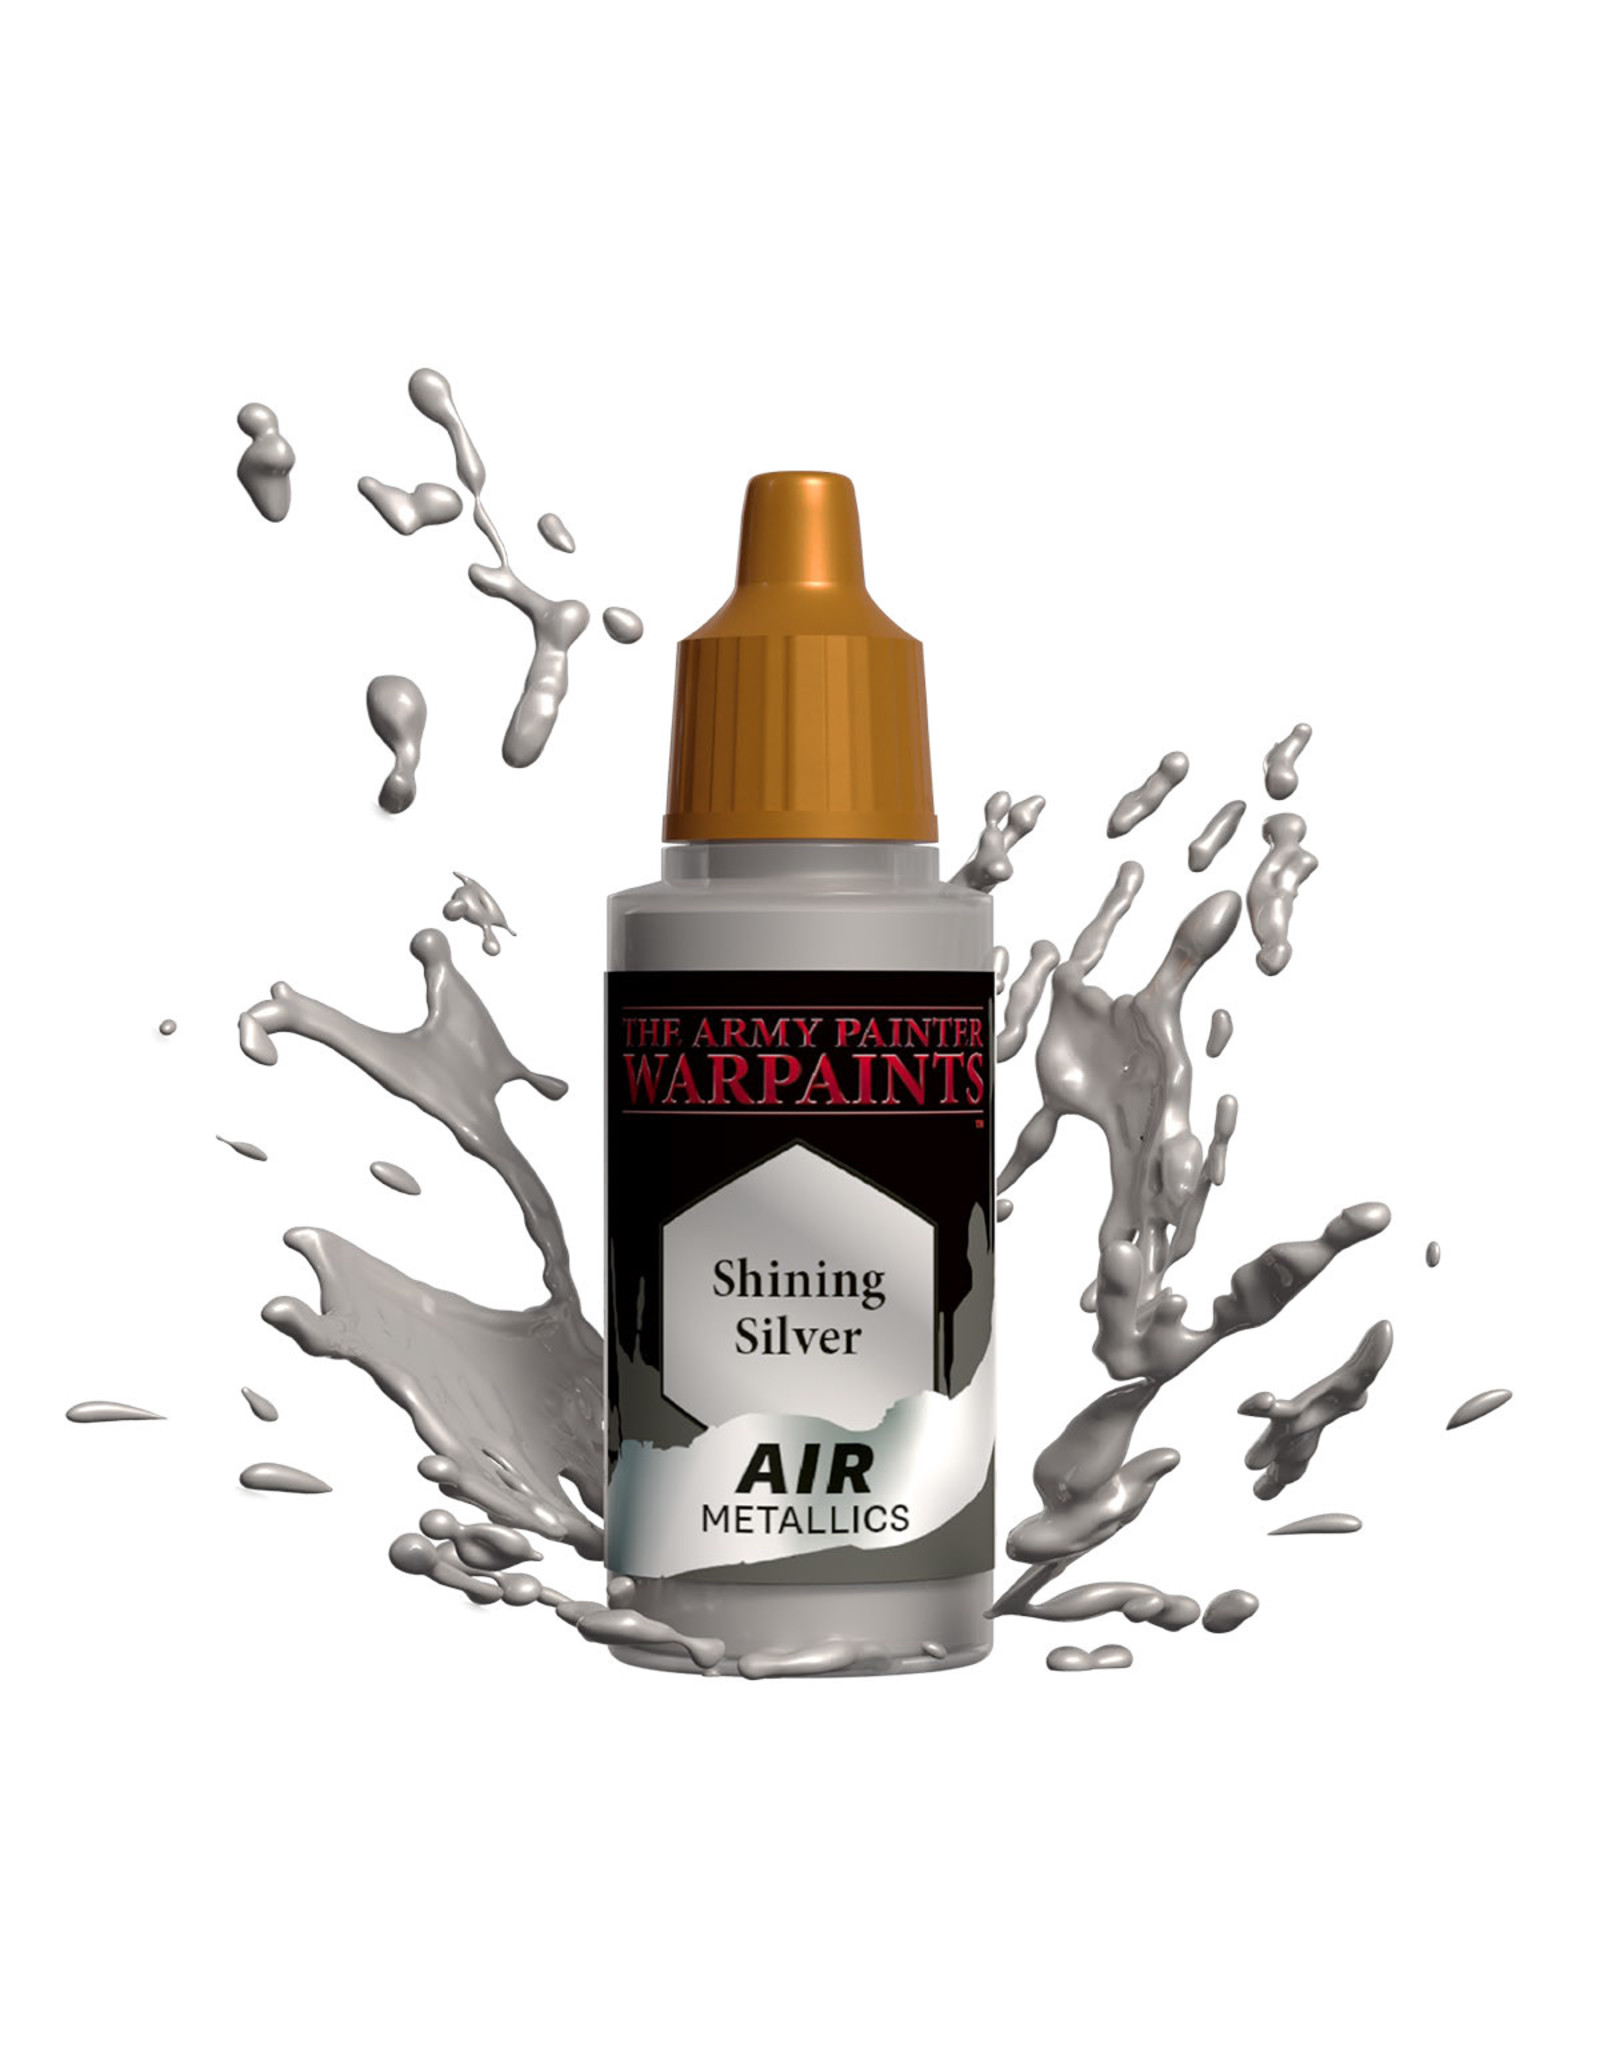 The Army Painter The Army Painter Warpaints Air Metallics: Shining Silver